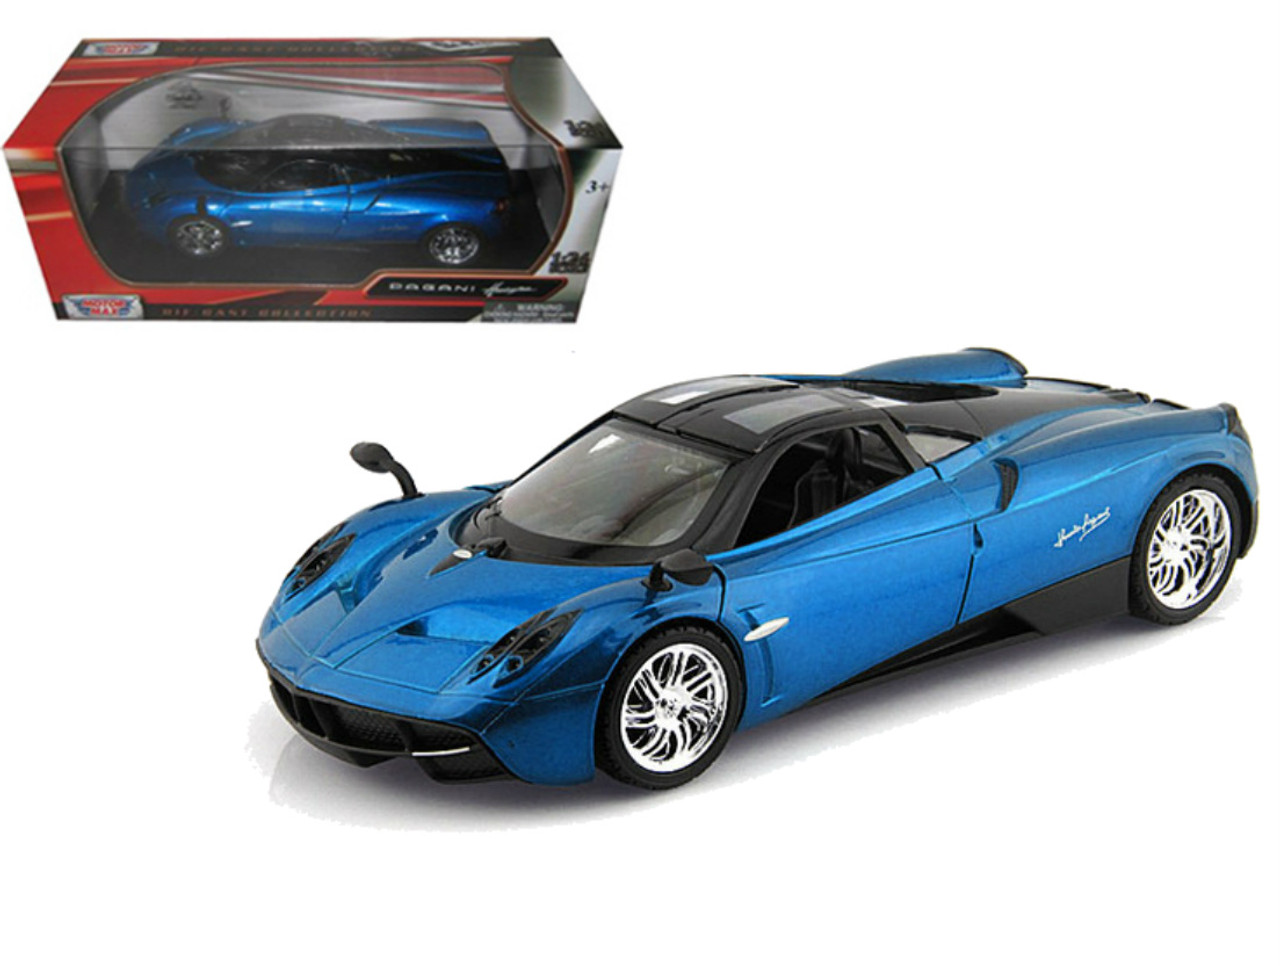 PAGANI HUAYRA BLUE 1/24 SCALE DIECAST CAR MODEL BY MOTOR MAX 79312